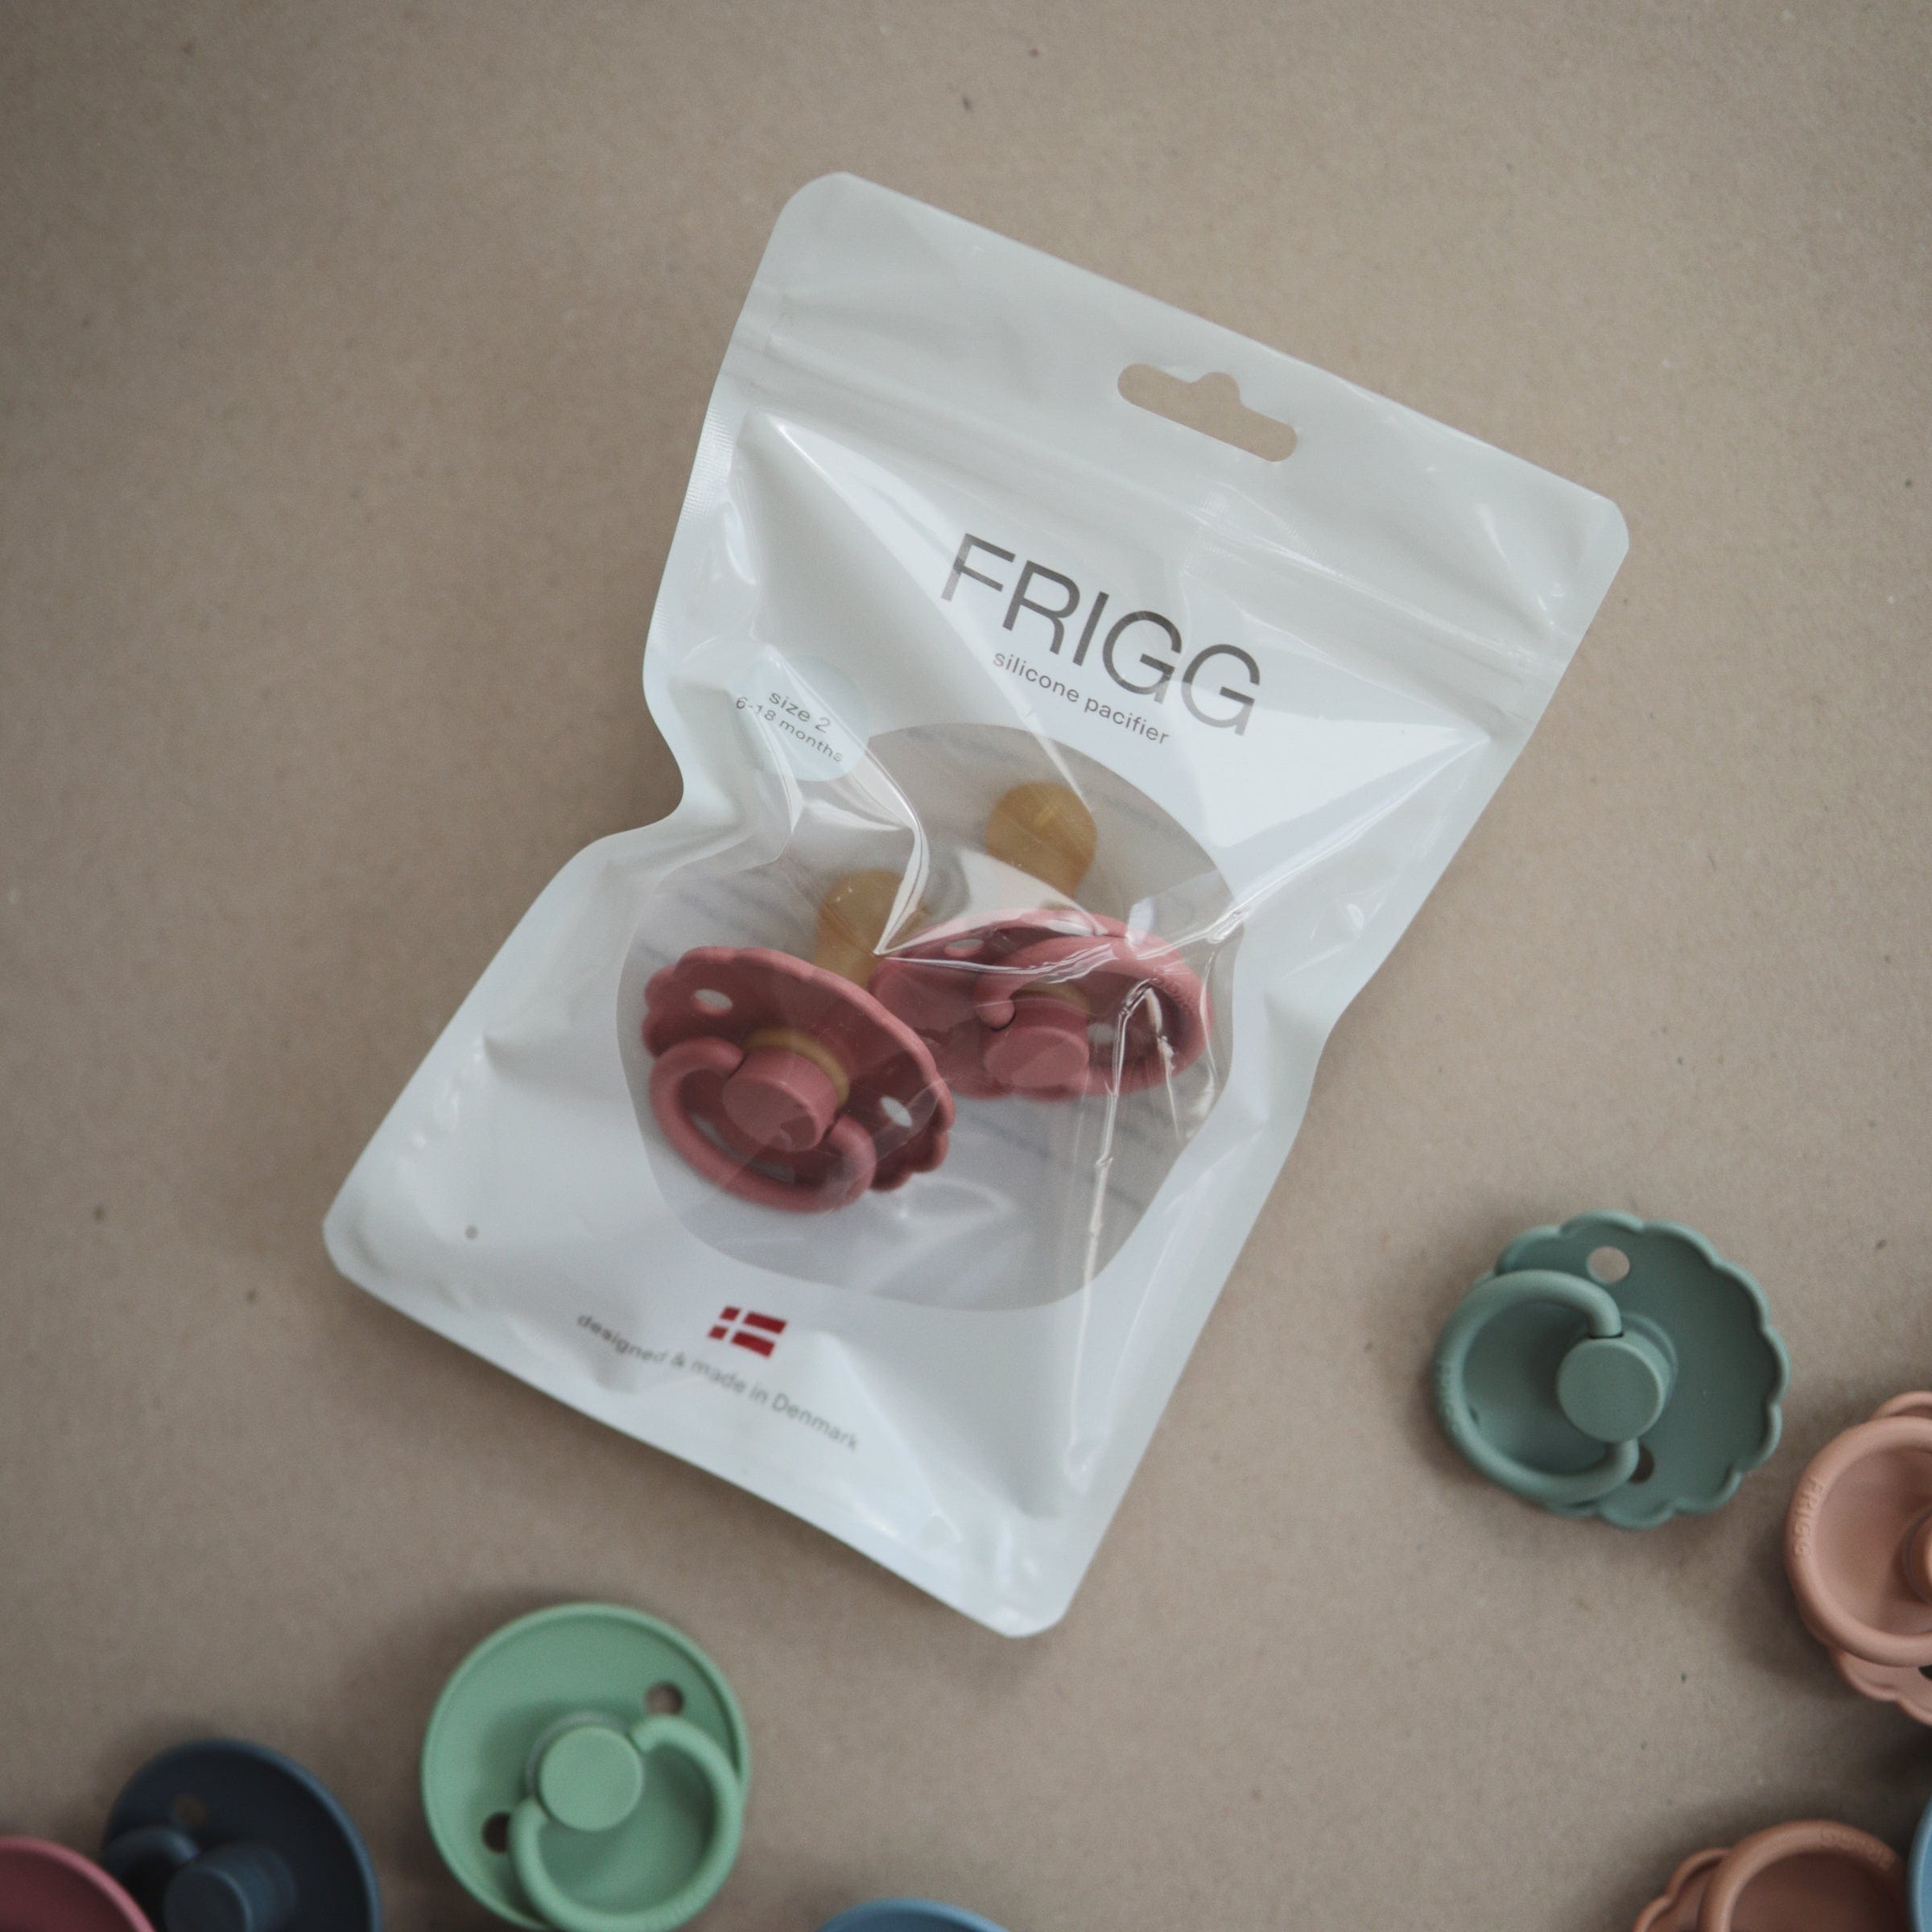 FRIGG Daisy Natural Rubber Baby Pacifier (Rose Gold / Honey Gold) Frigg Pacifiers & Teethers Lil Tulips